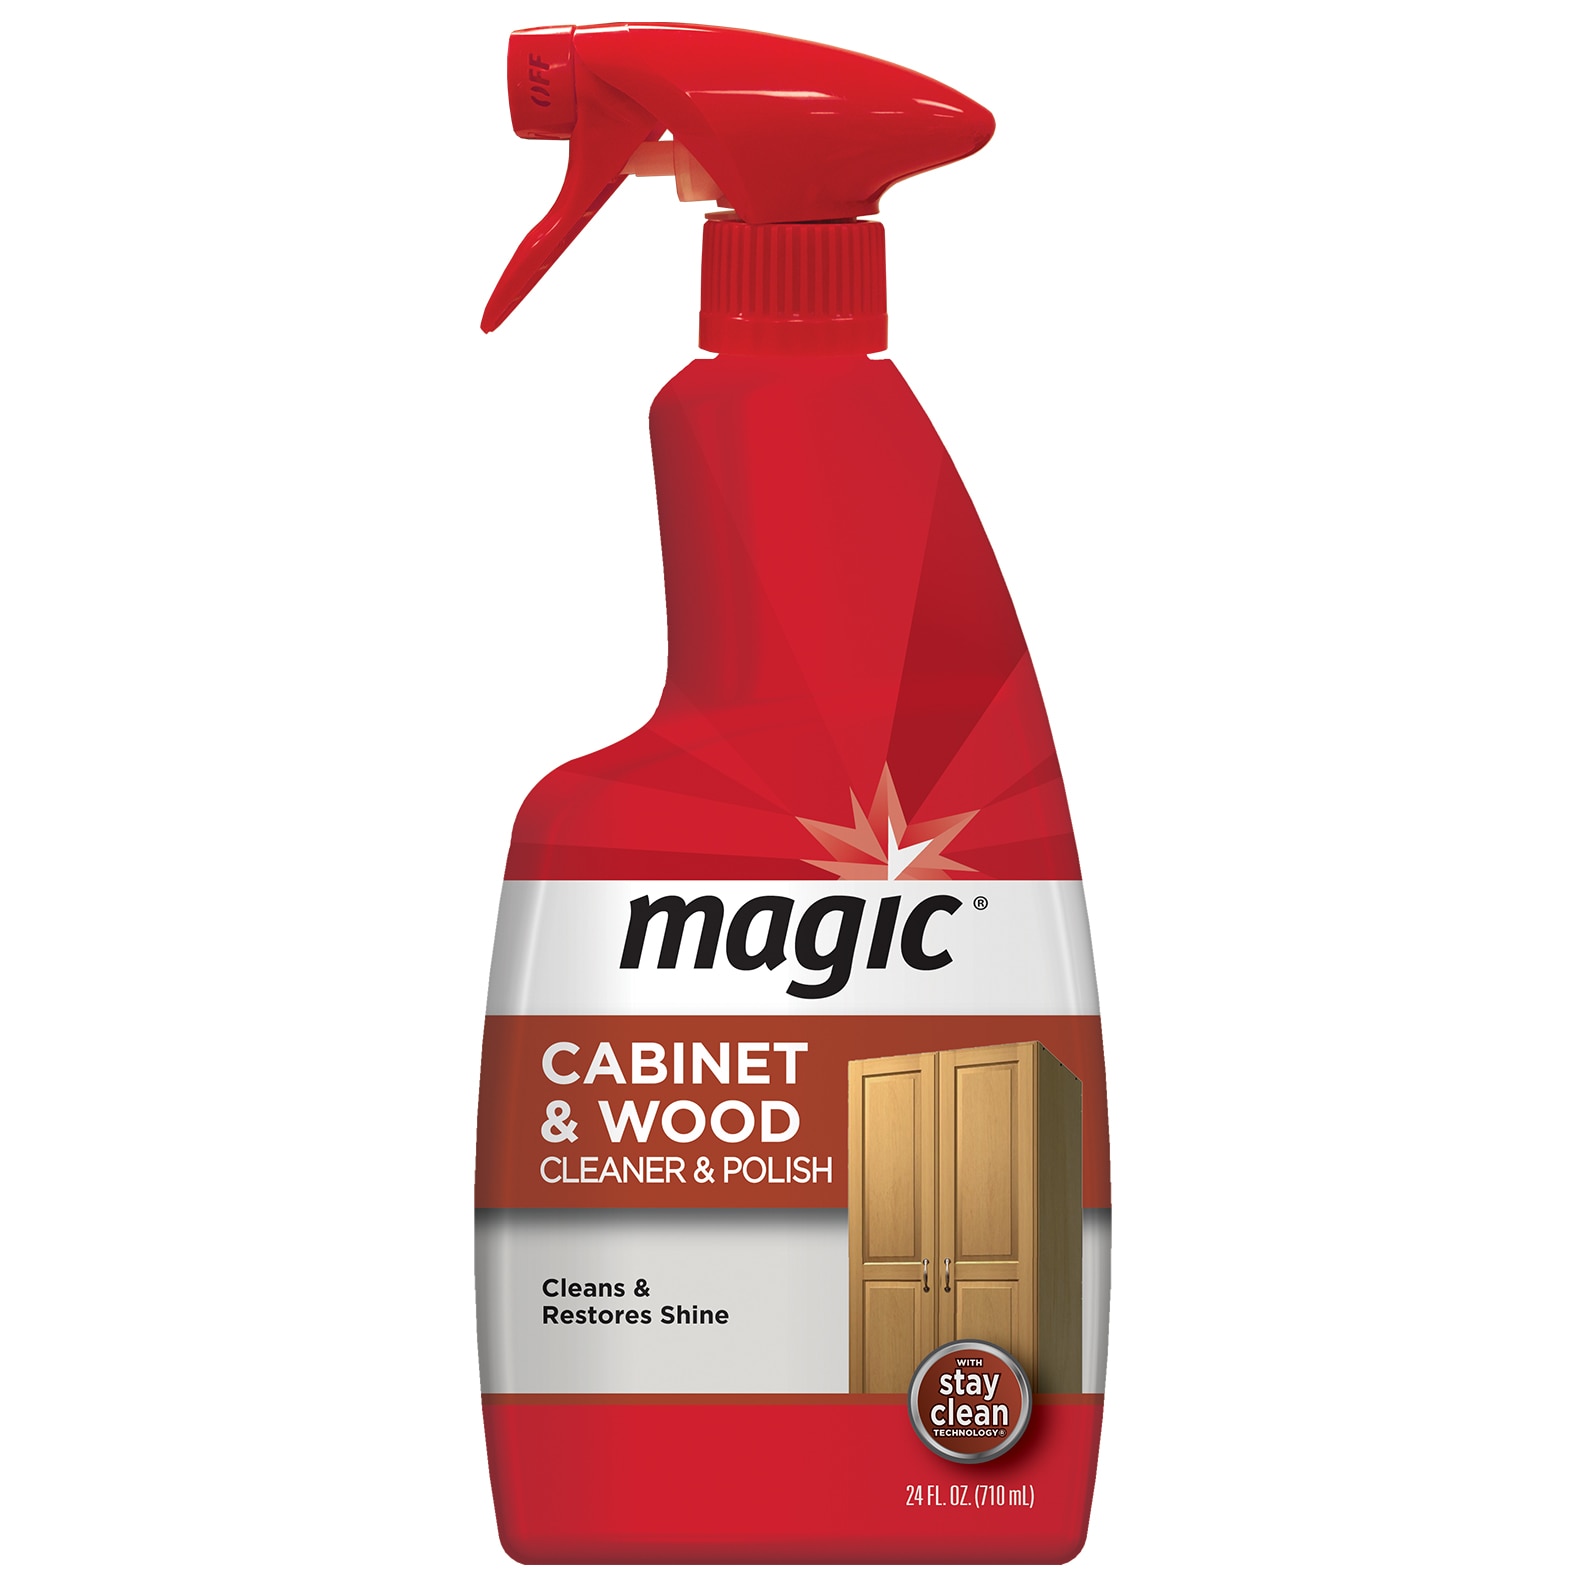 2) Magic Countertop Cleaner Ideal for Laminate 17 Oz Each Stay